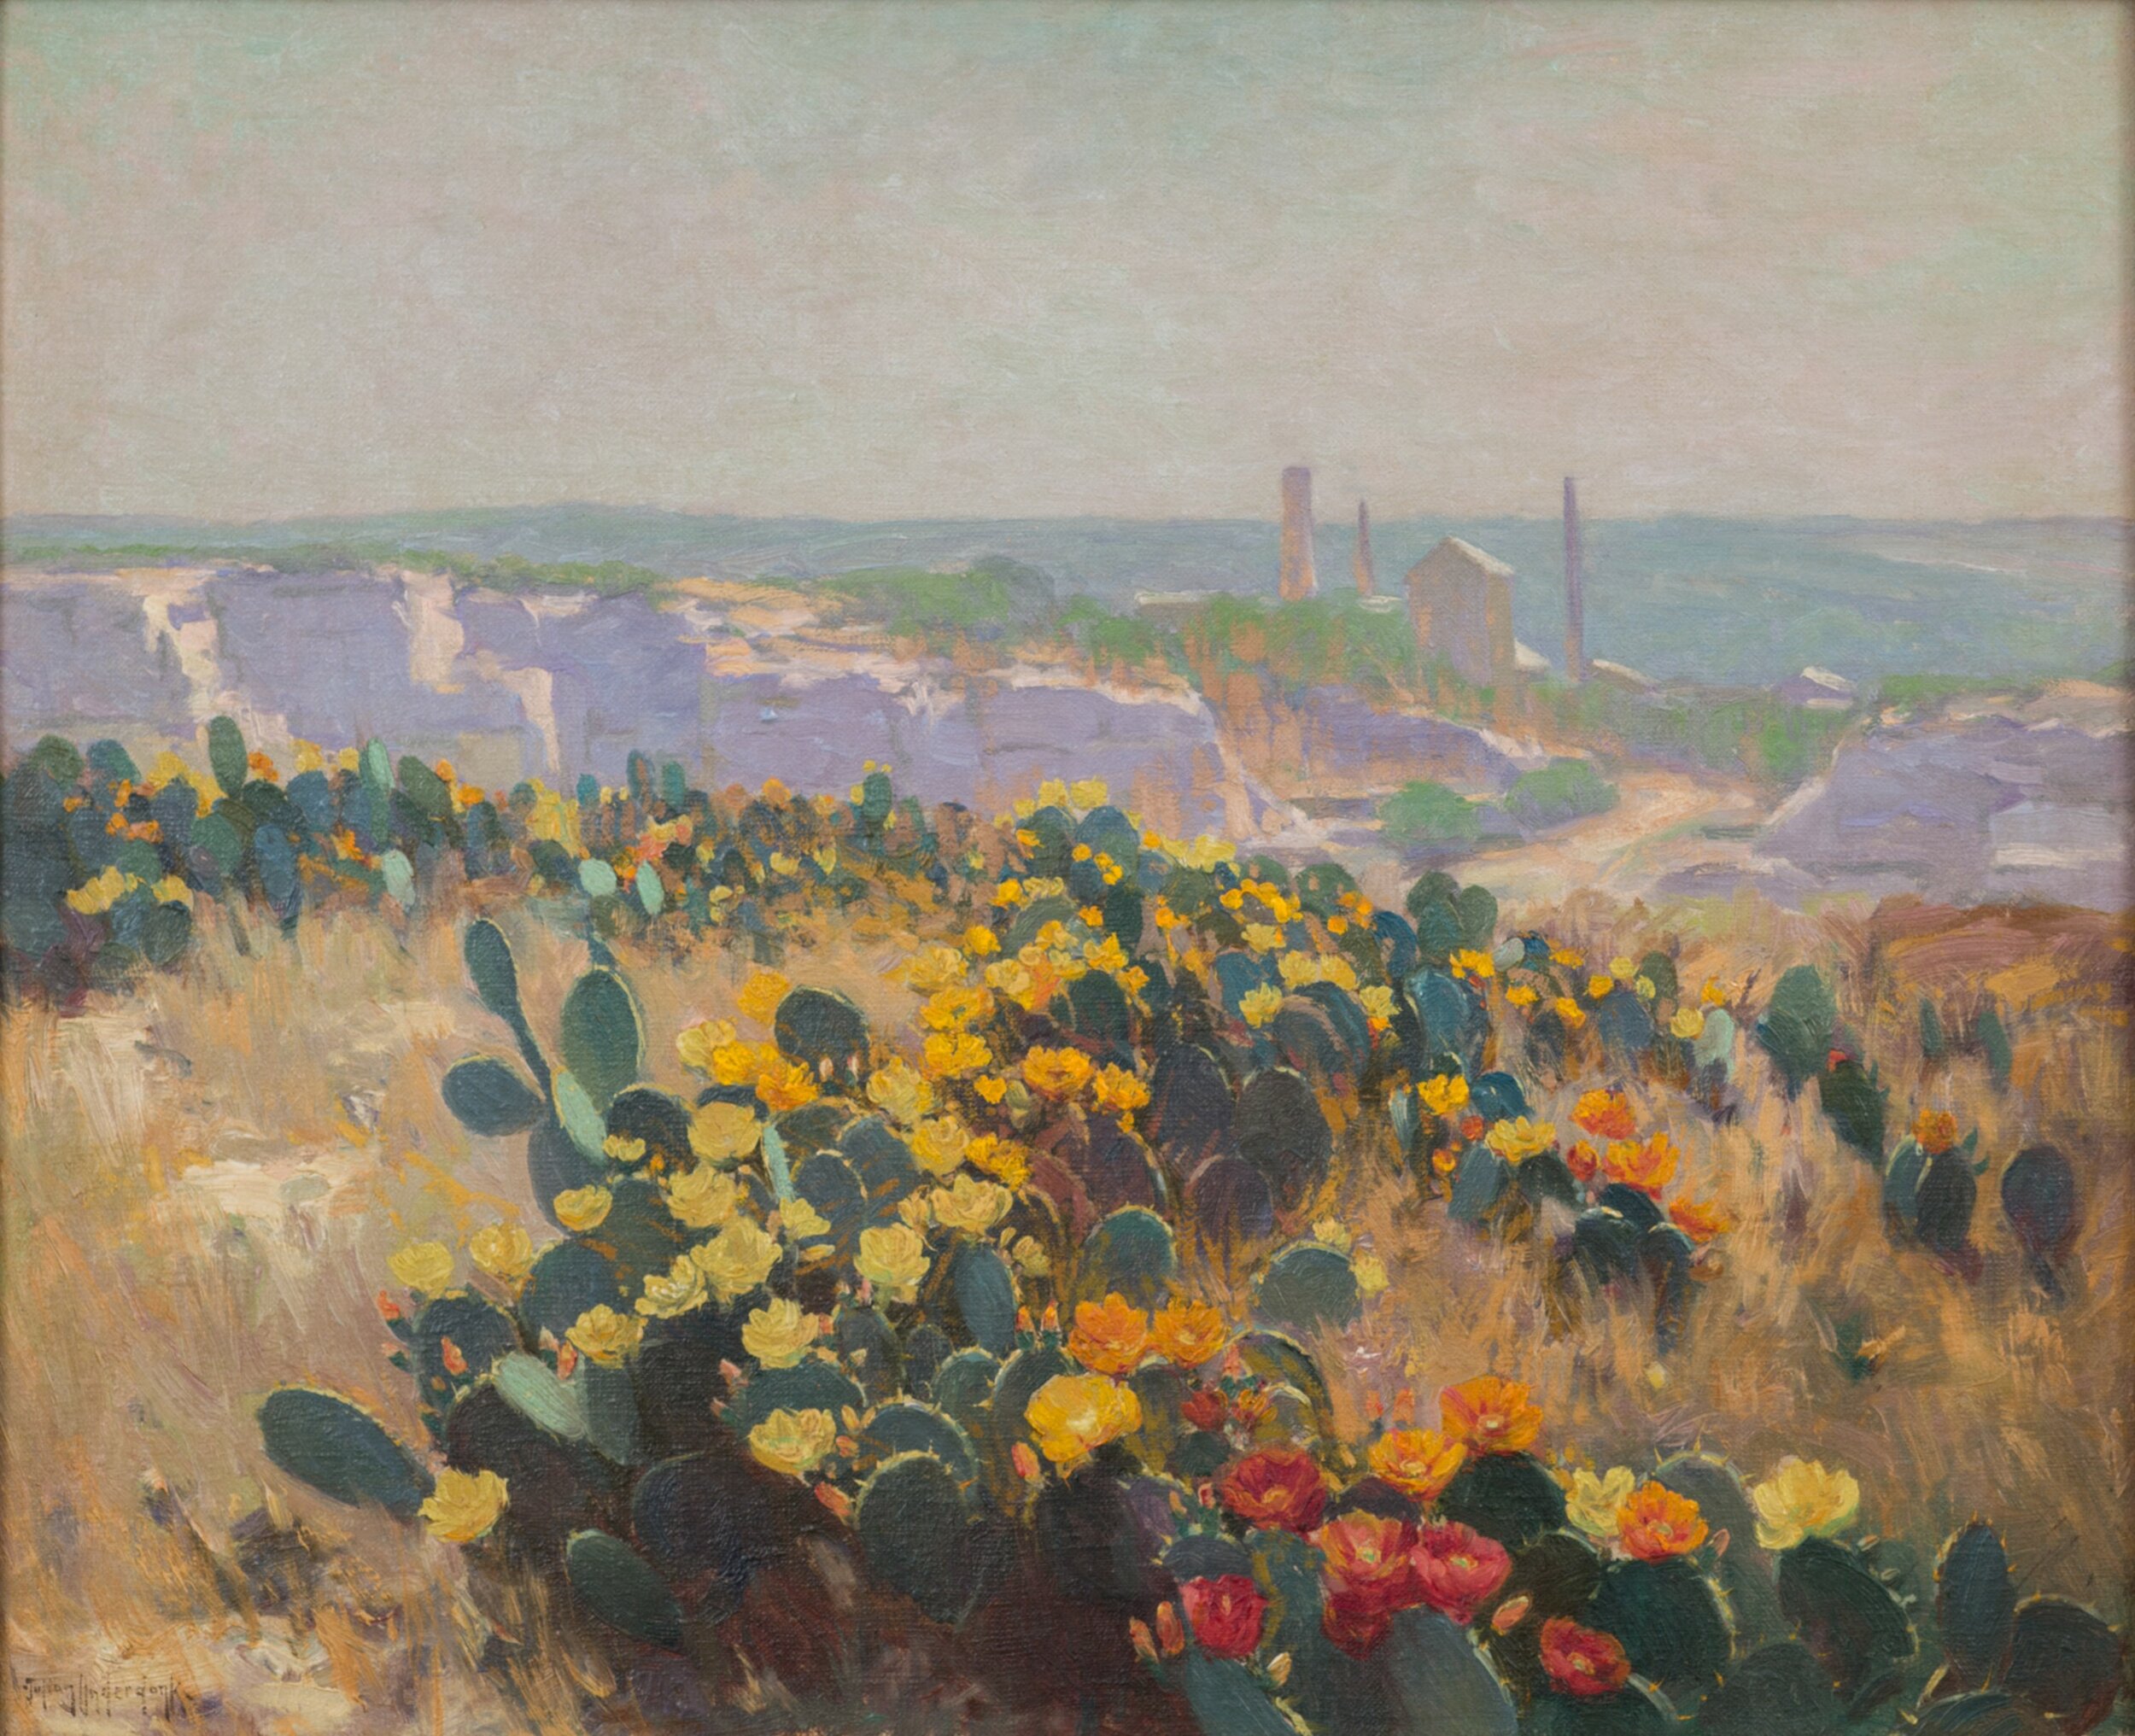   JULIAN ONDERDONK  (American, 1882-1922),  Cactus in Bloom , 1913, Oil on canvas, 17 ½ x 21 ½ inches, Courtesy of the Albritton Collection 